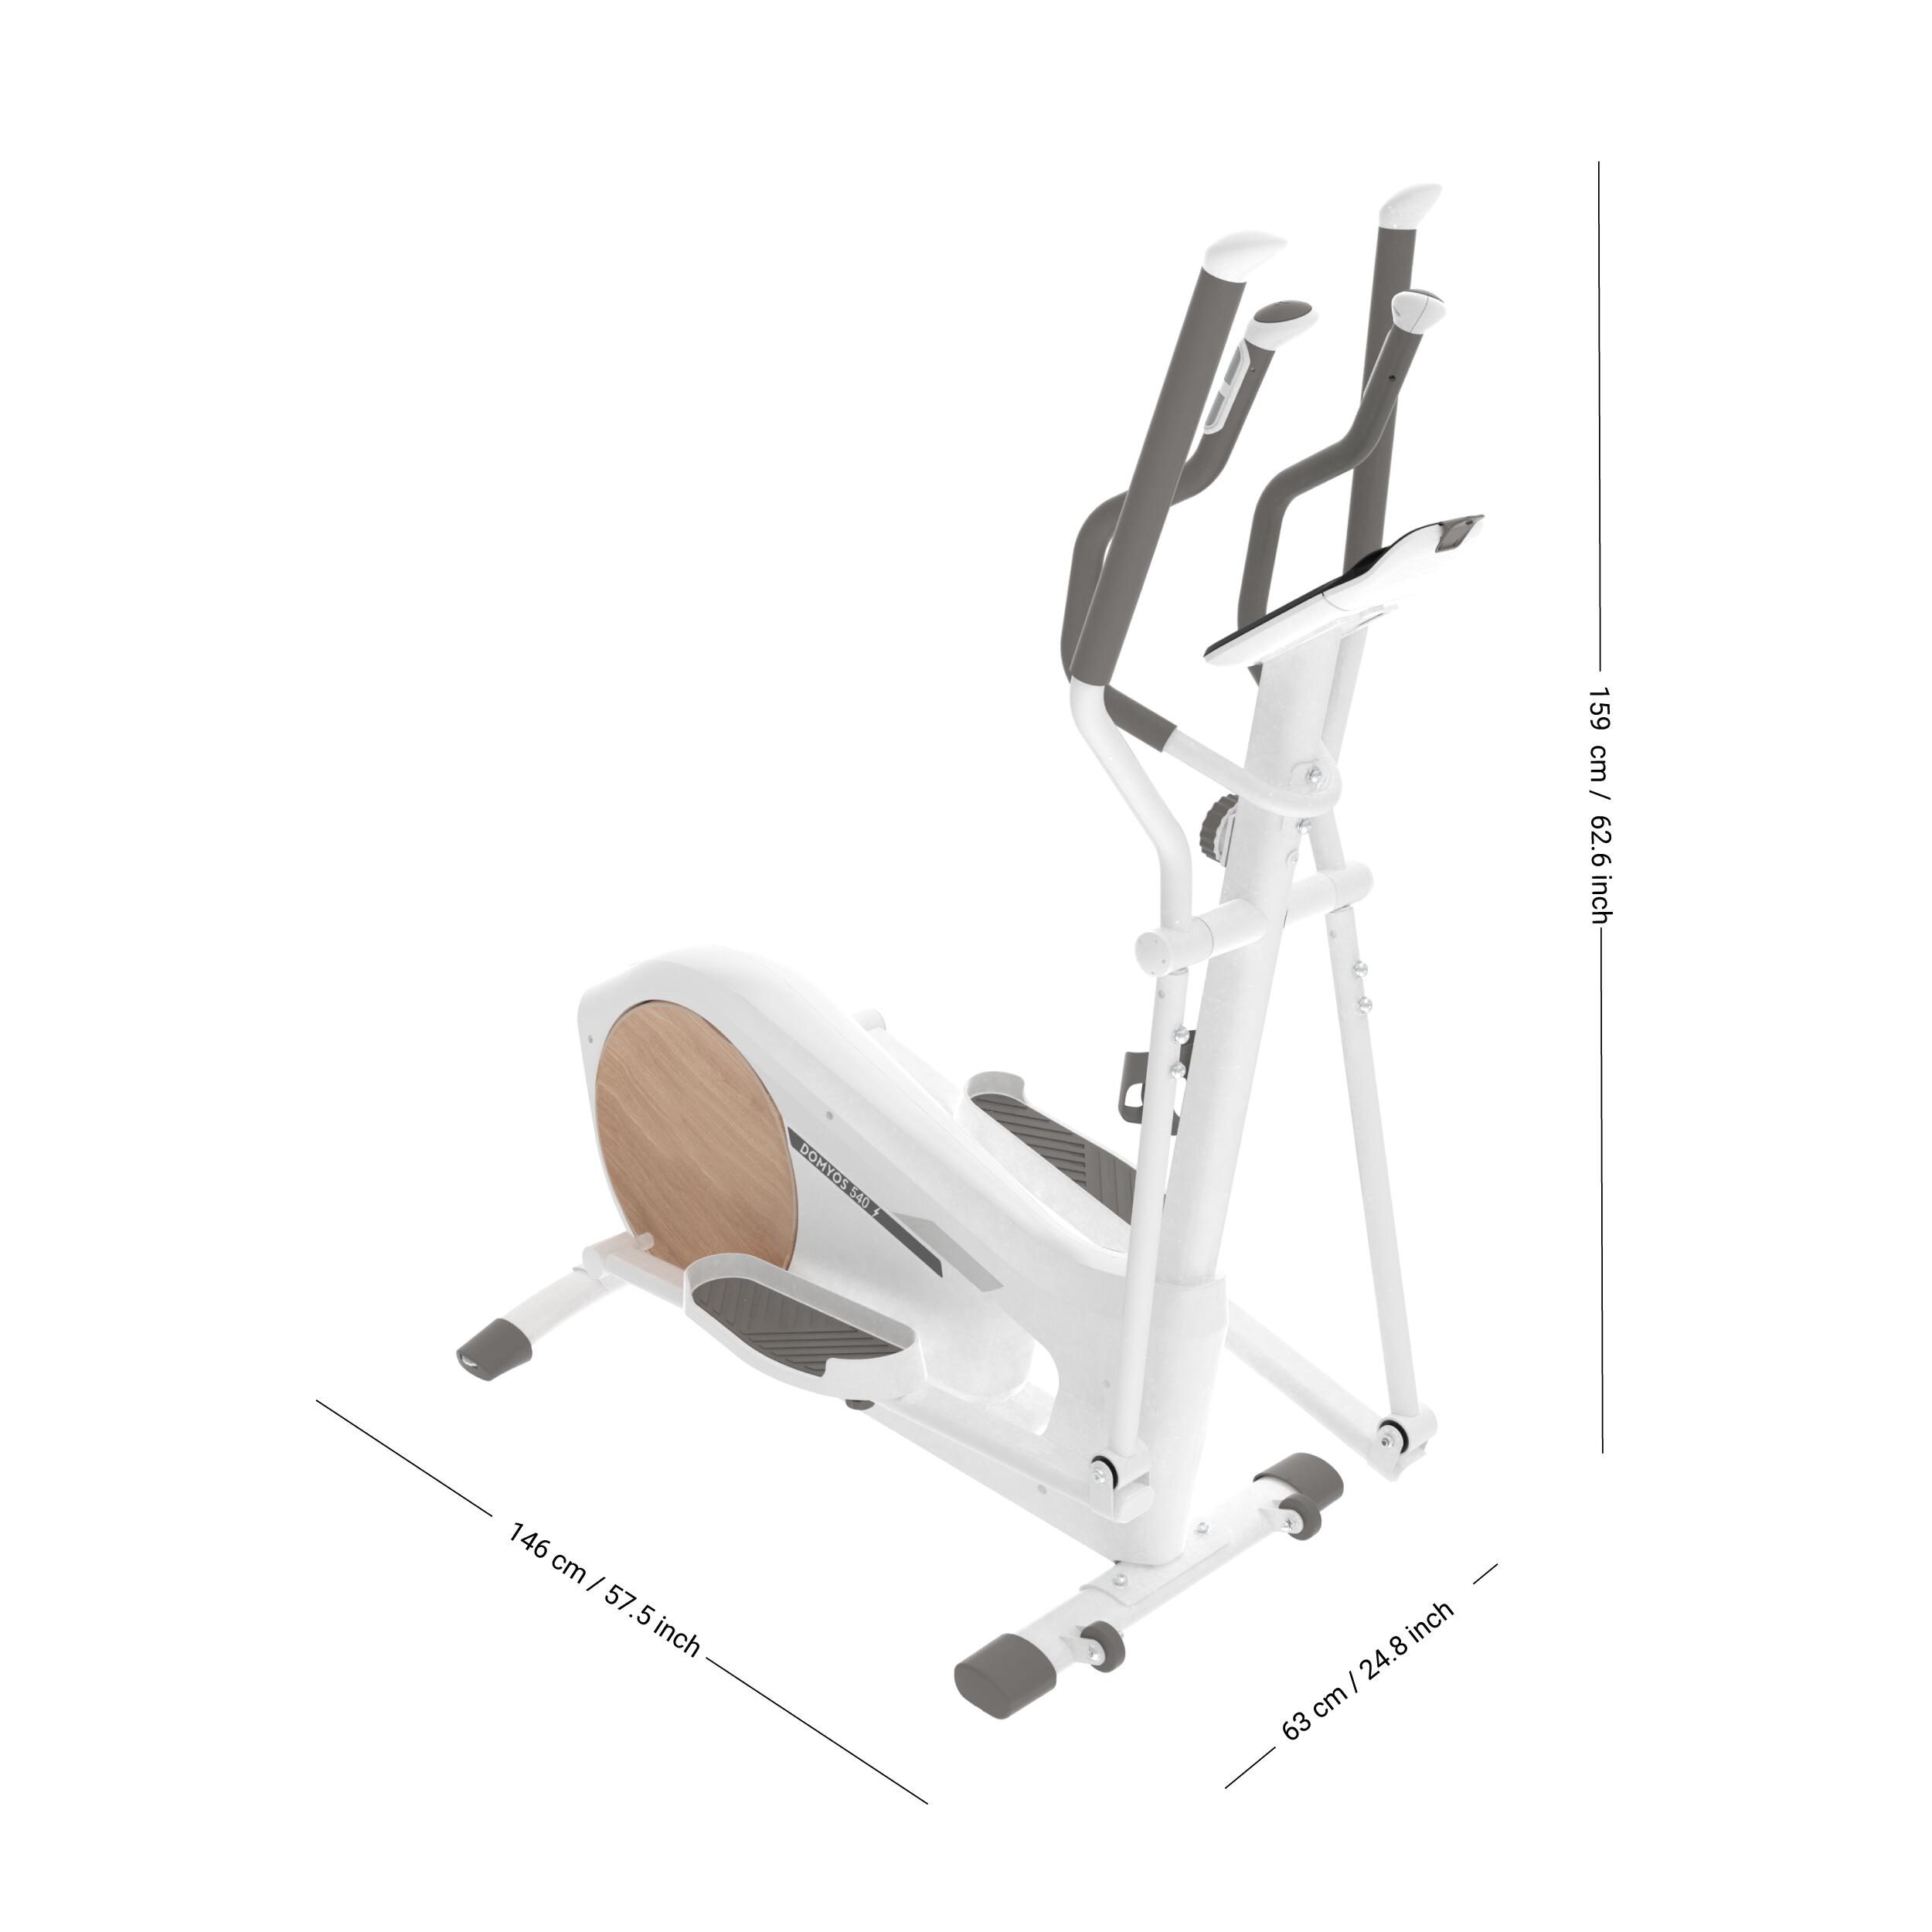 Self-Powered and Connected, E-Connected & Kinomap Compatible Cross Trainer EL540 2/3